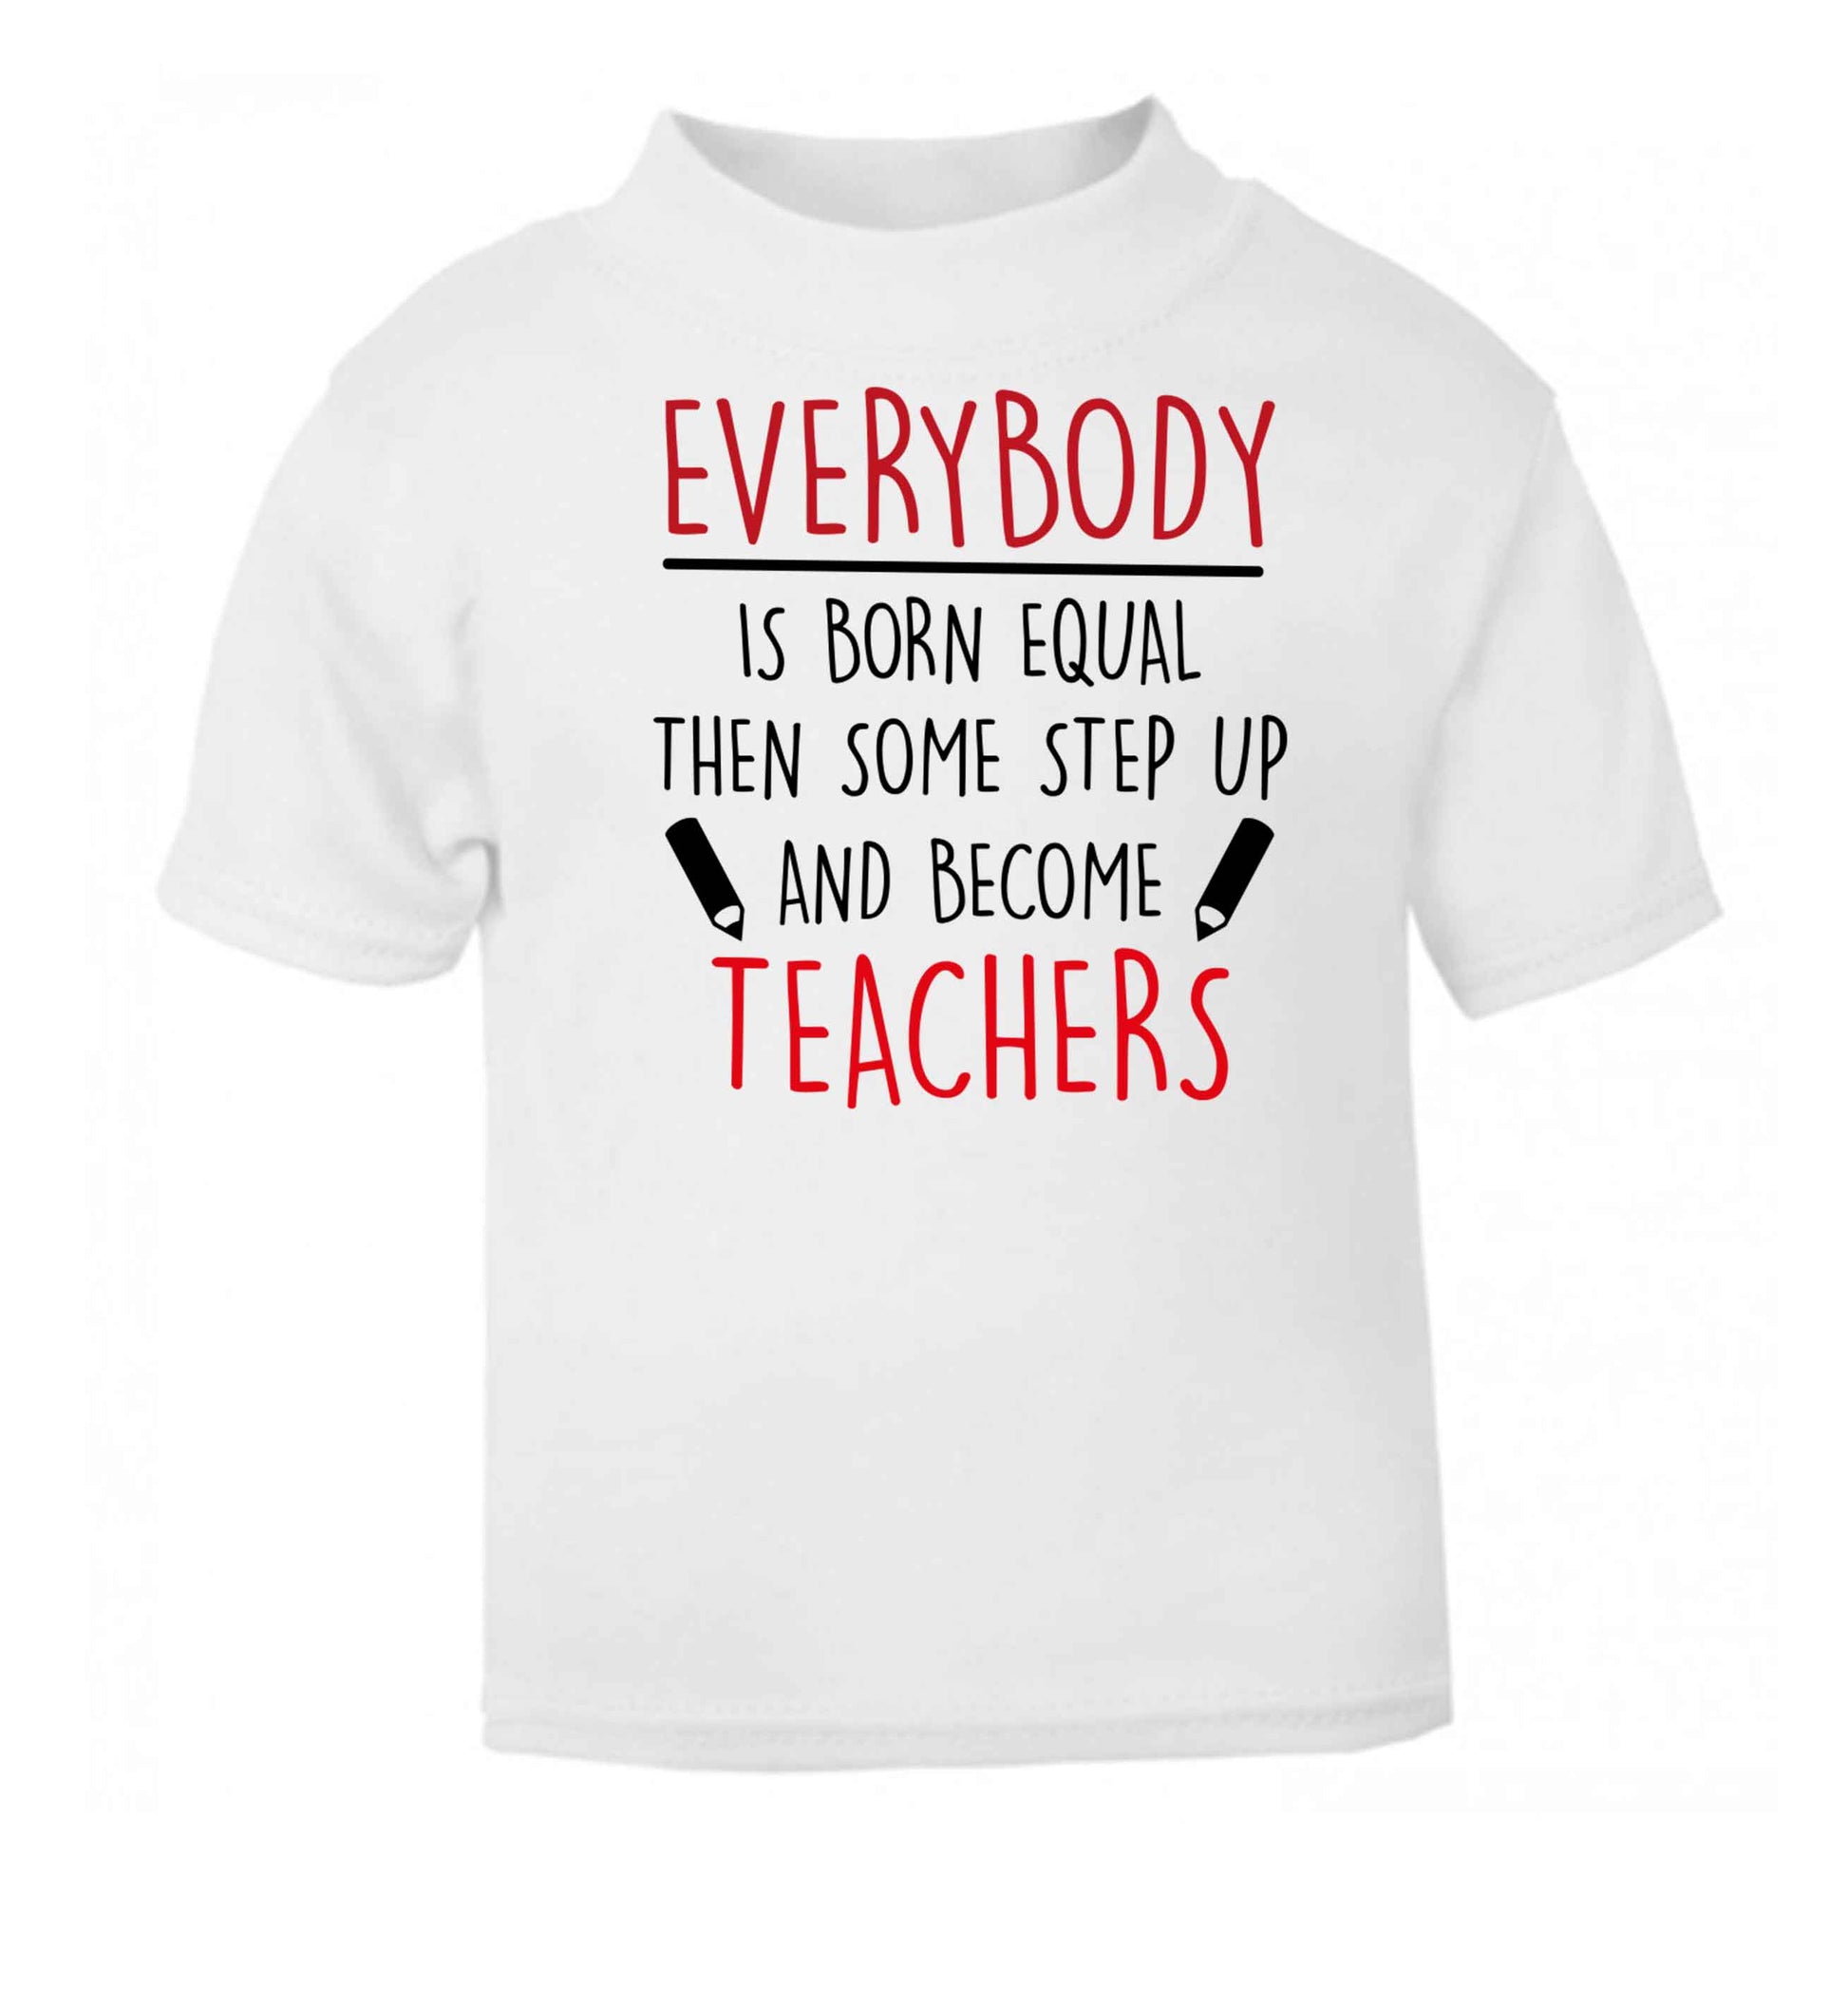 Everybody is born equal then some step up and become teachers white baby toddler Tshirt 2 Years